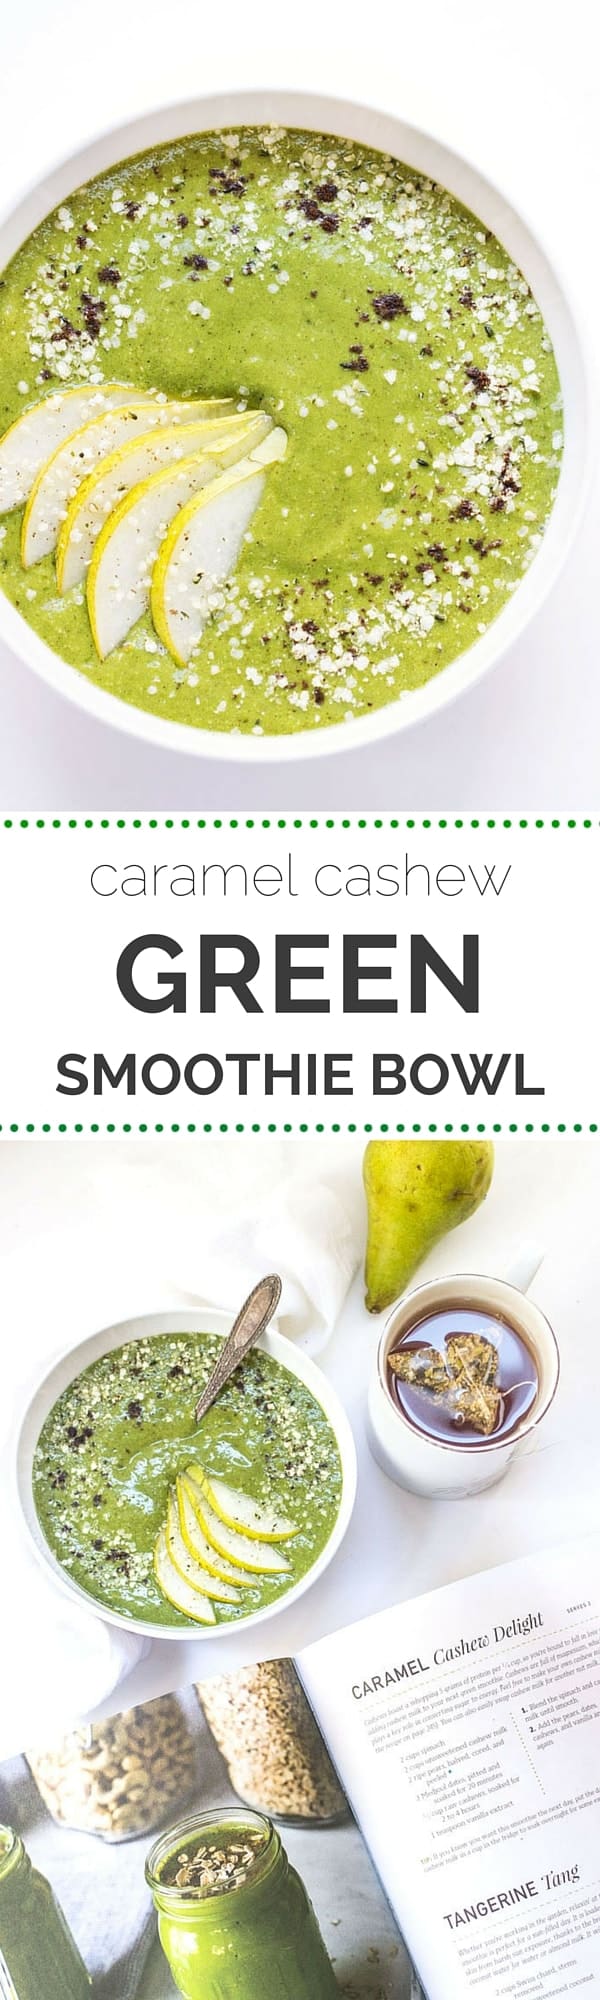 I wish my breakfast always tasted like ice cream! This Caramel Cashew Green Smoothie Bowl was probably the most delicious healthy breakfast I have ever eaten!